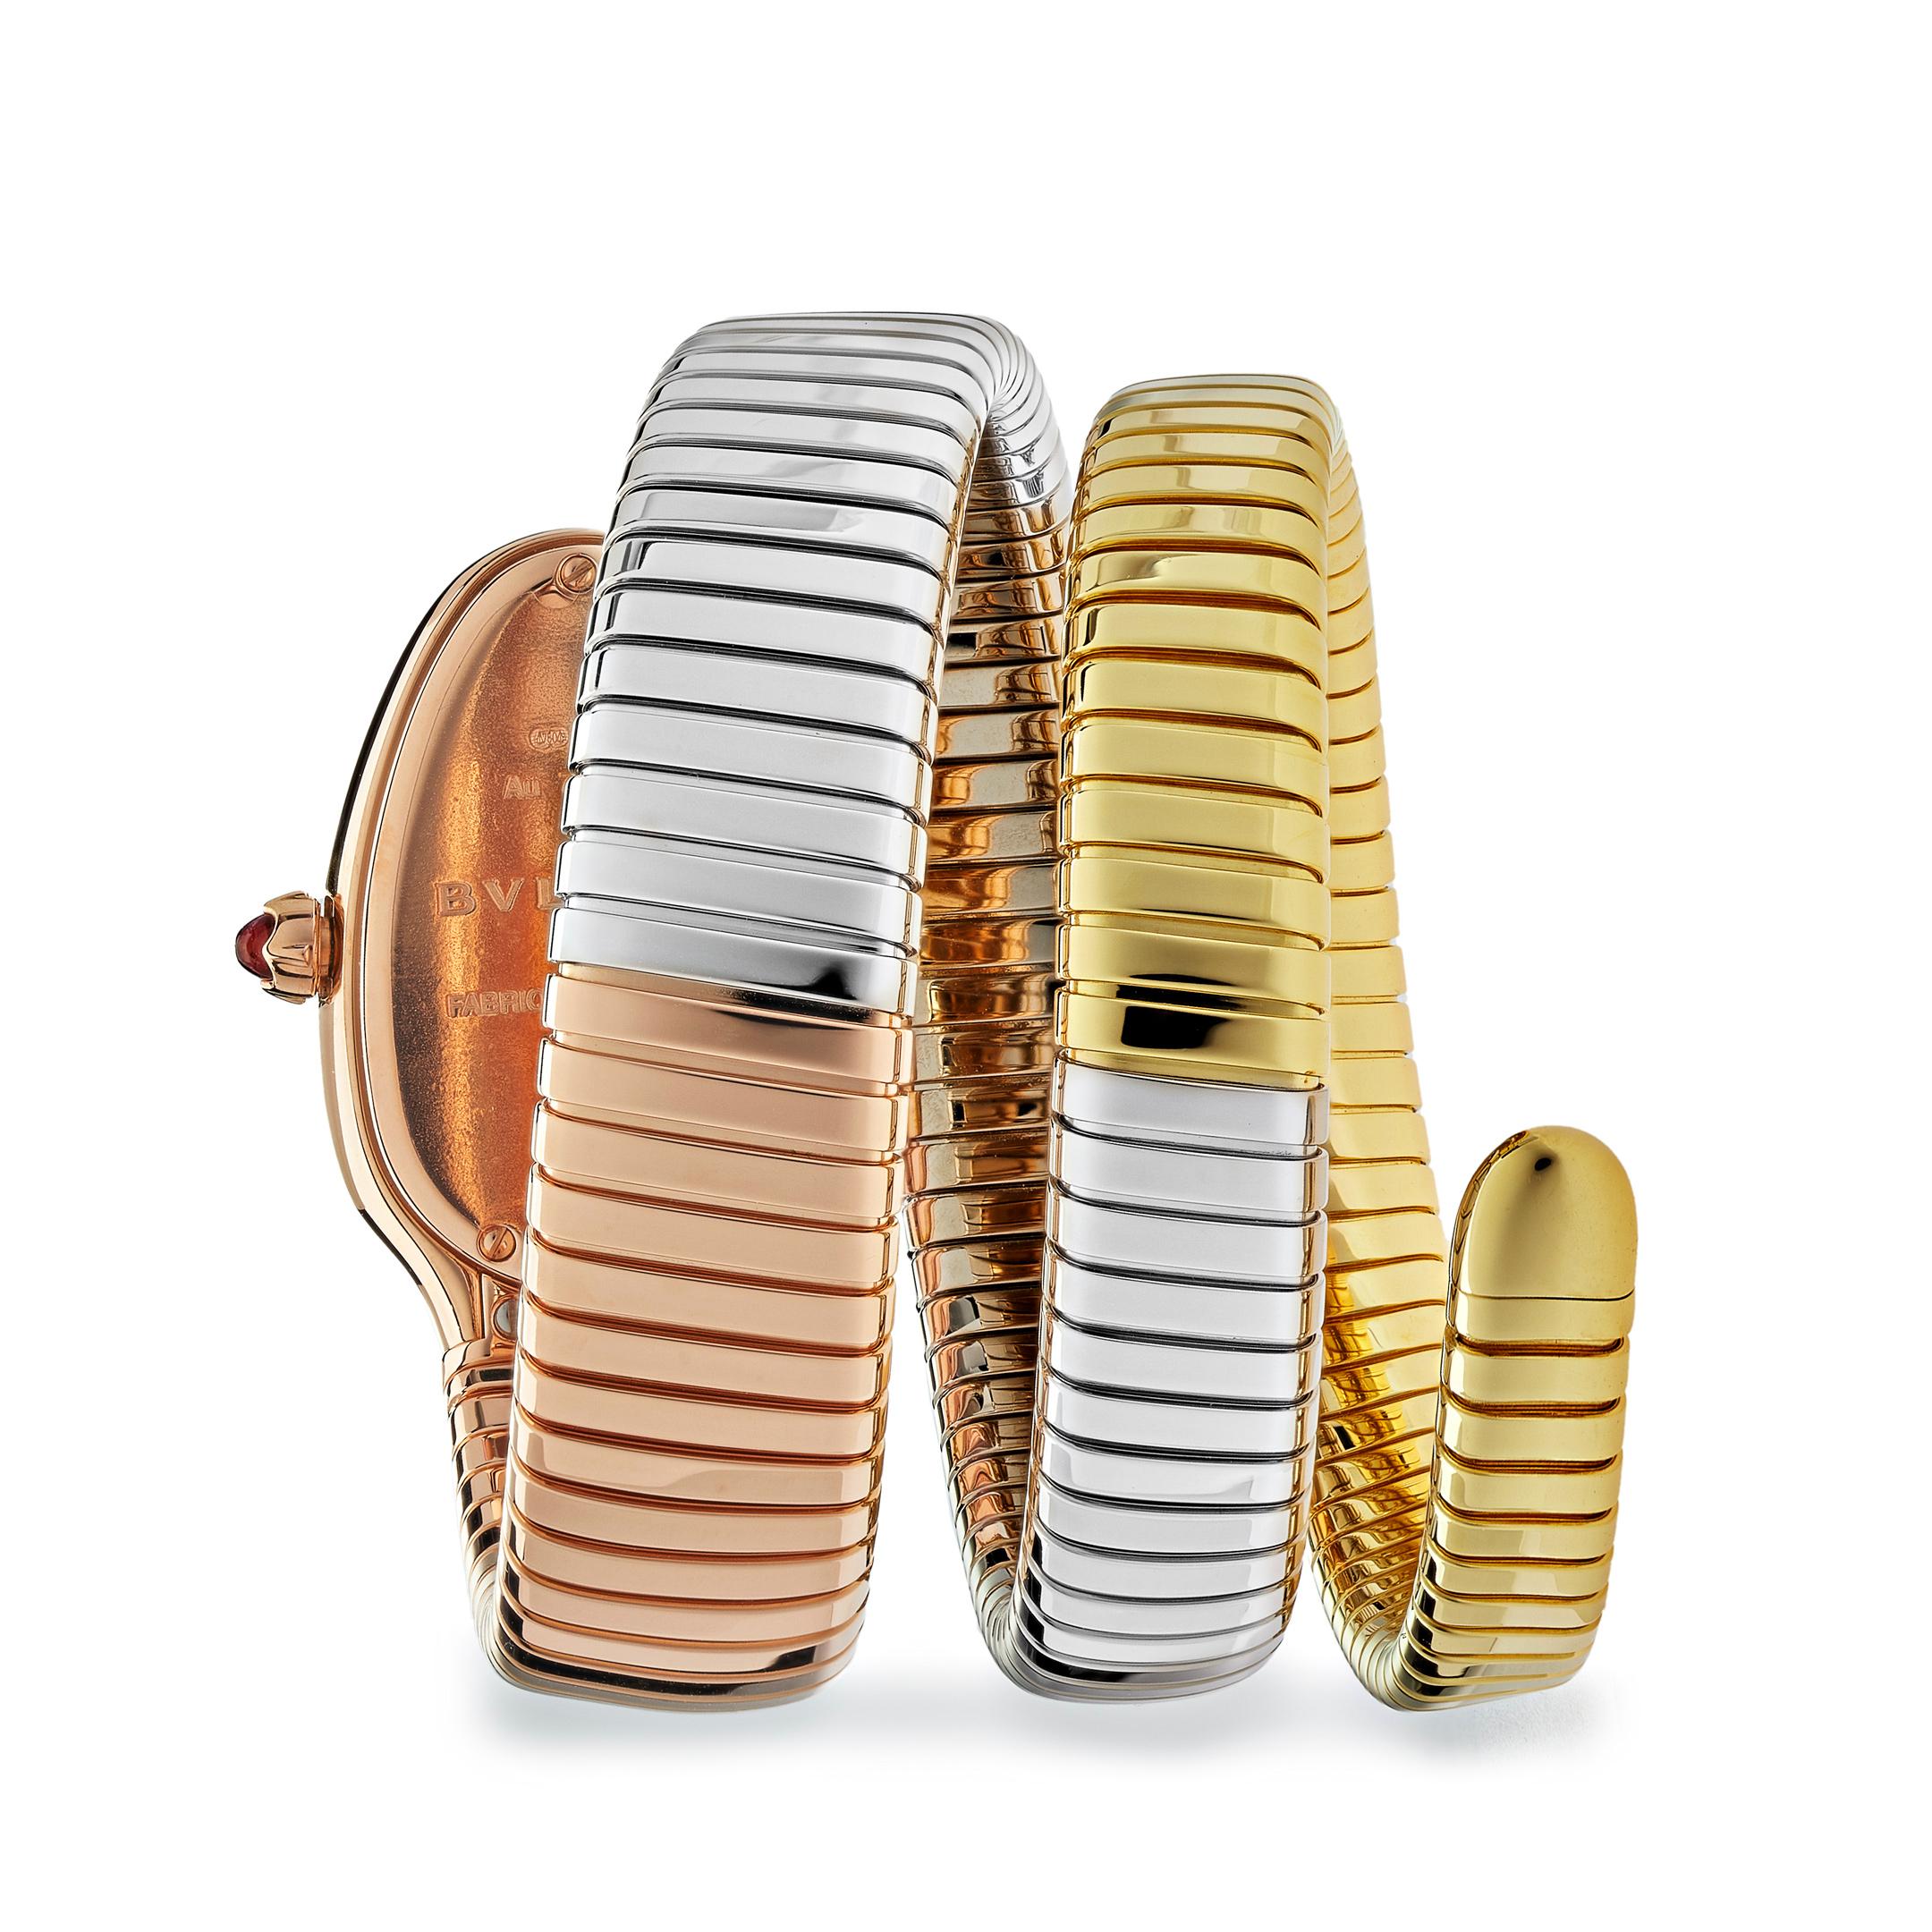 Merging two of the most iconic symbols of Bulgari design, the Serpenti Tubogas watch coils the sinuosity of the snake with the contemporary soul of tubogas. This Serpenti Tubogas watch features a 35 mm 18kt rose gold curved case set with round